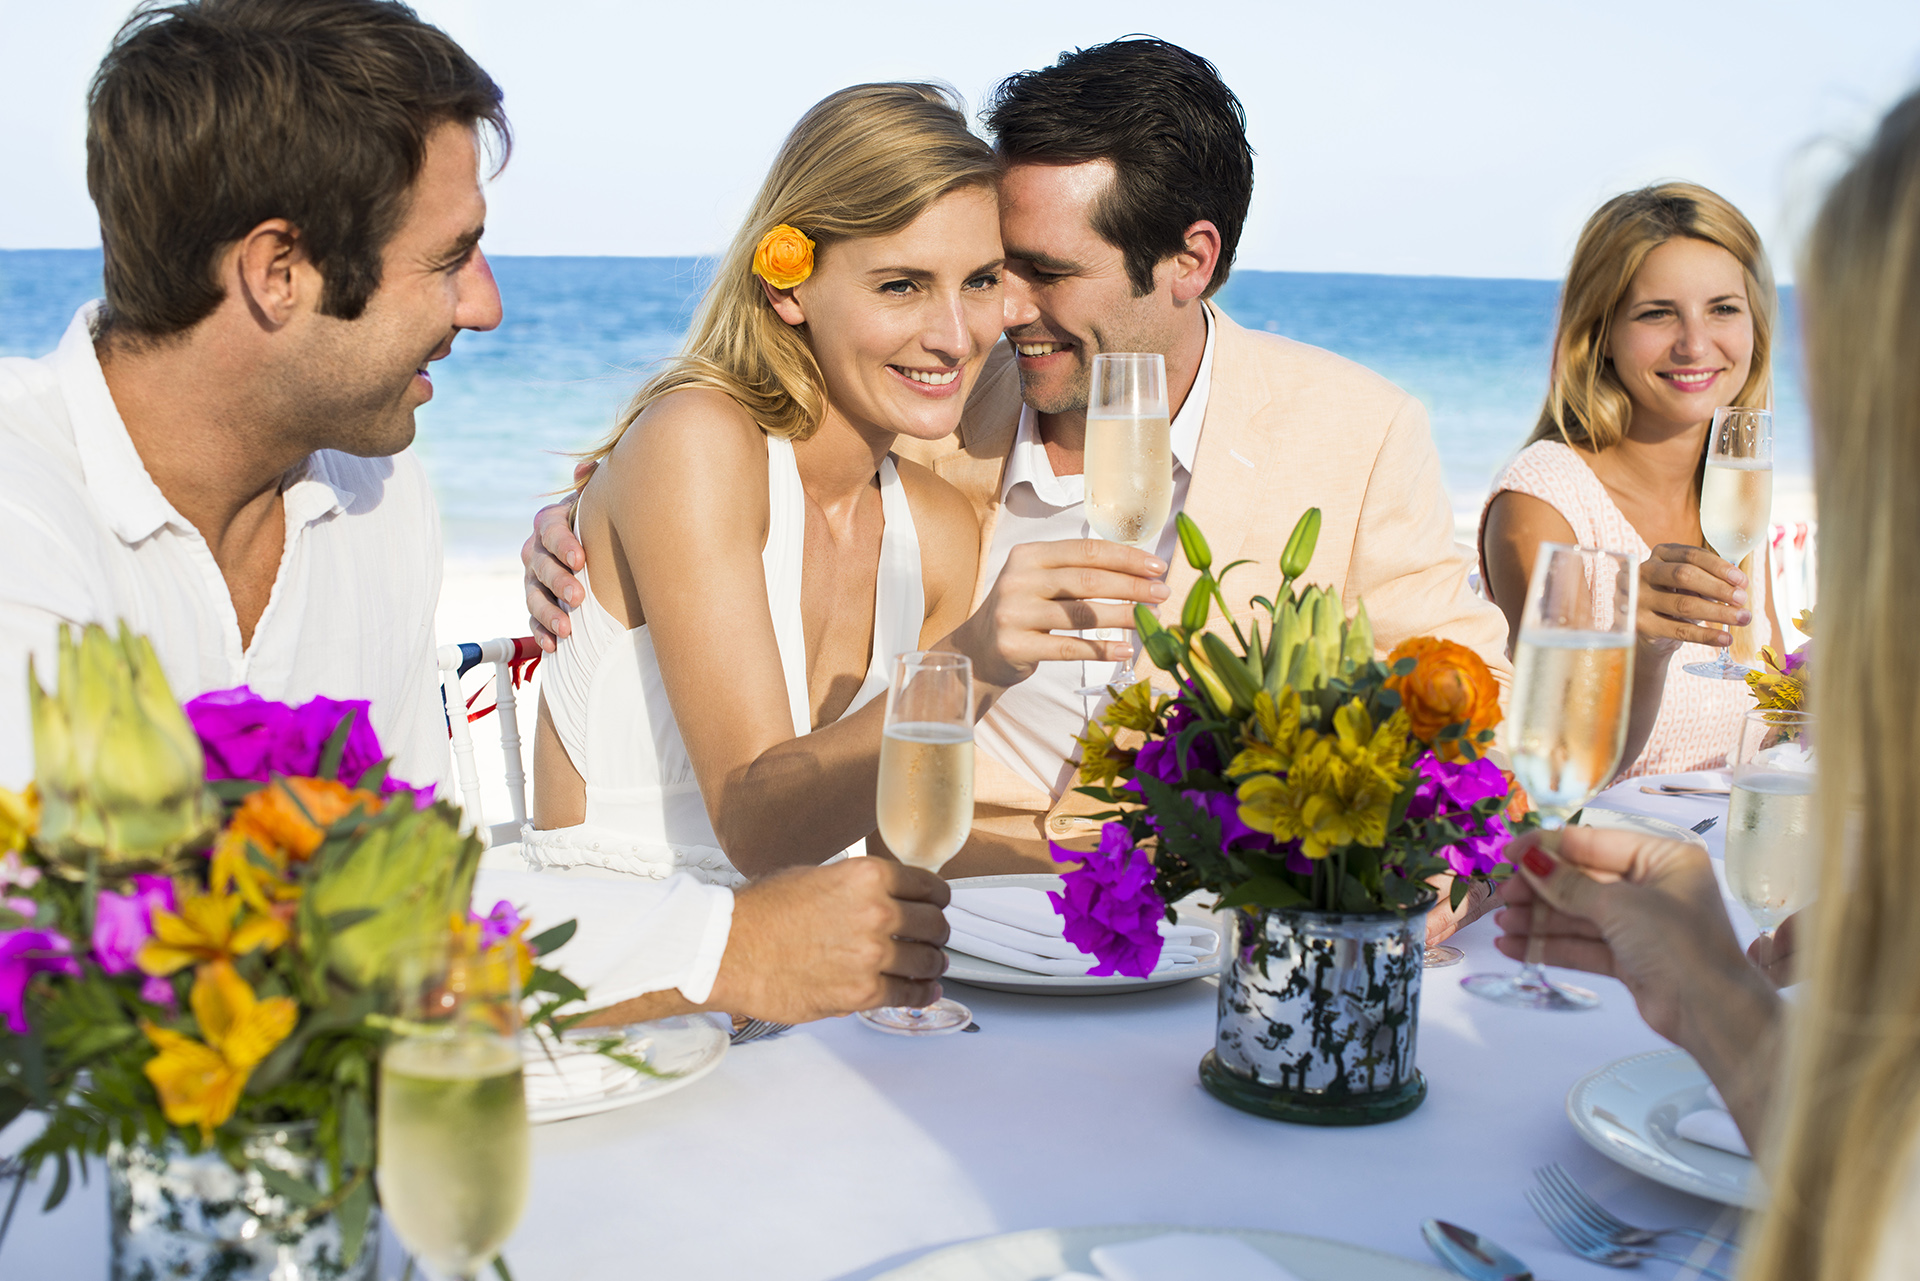 Have your wedding day in a Caribbean resort